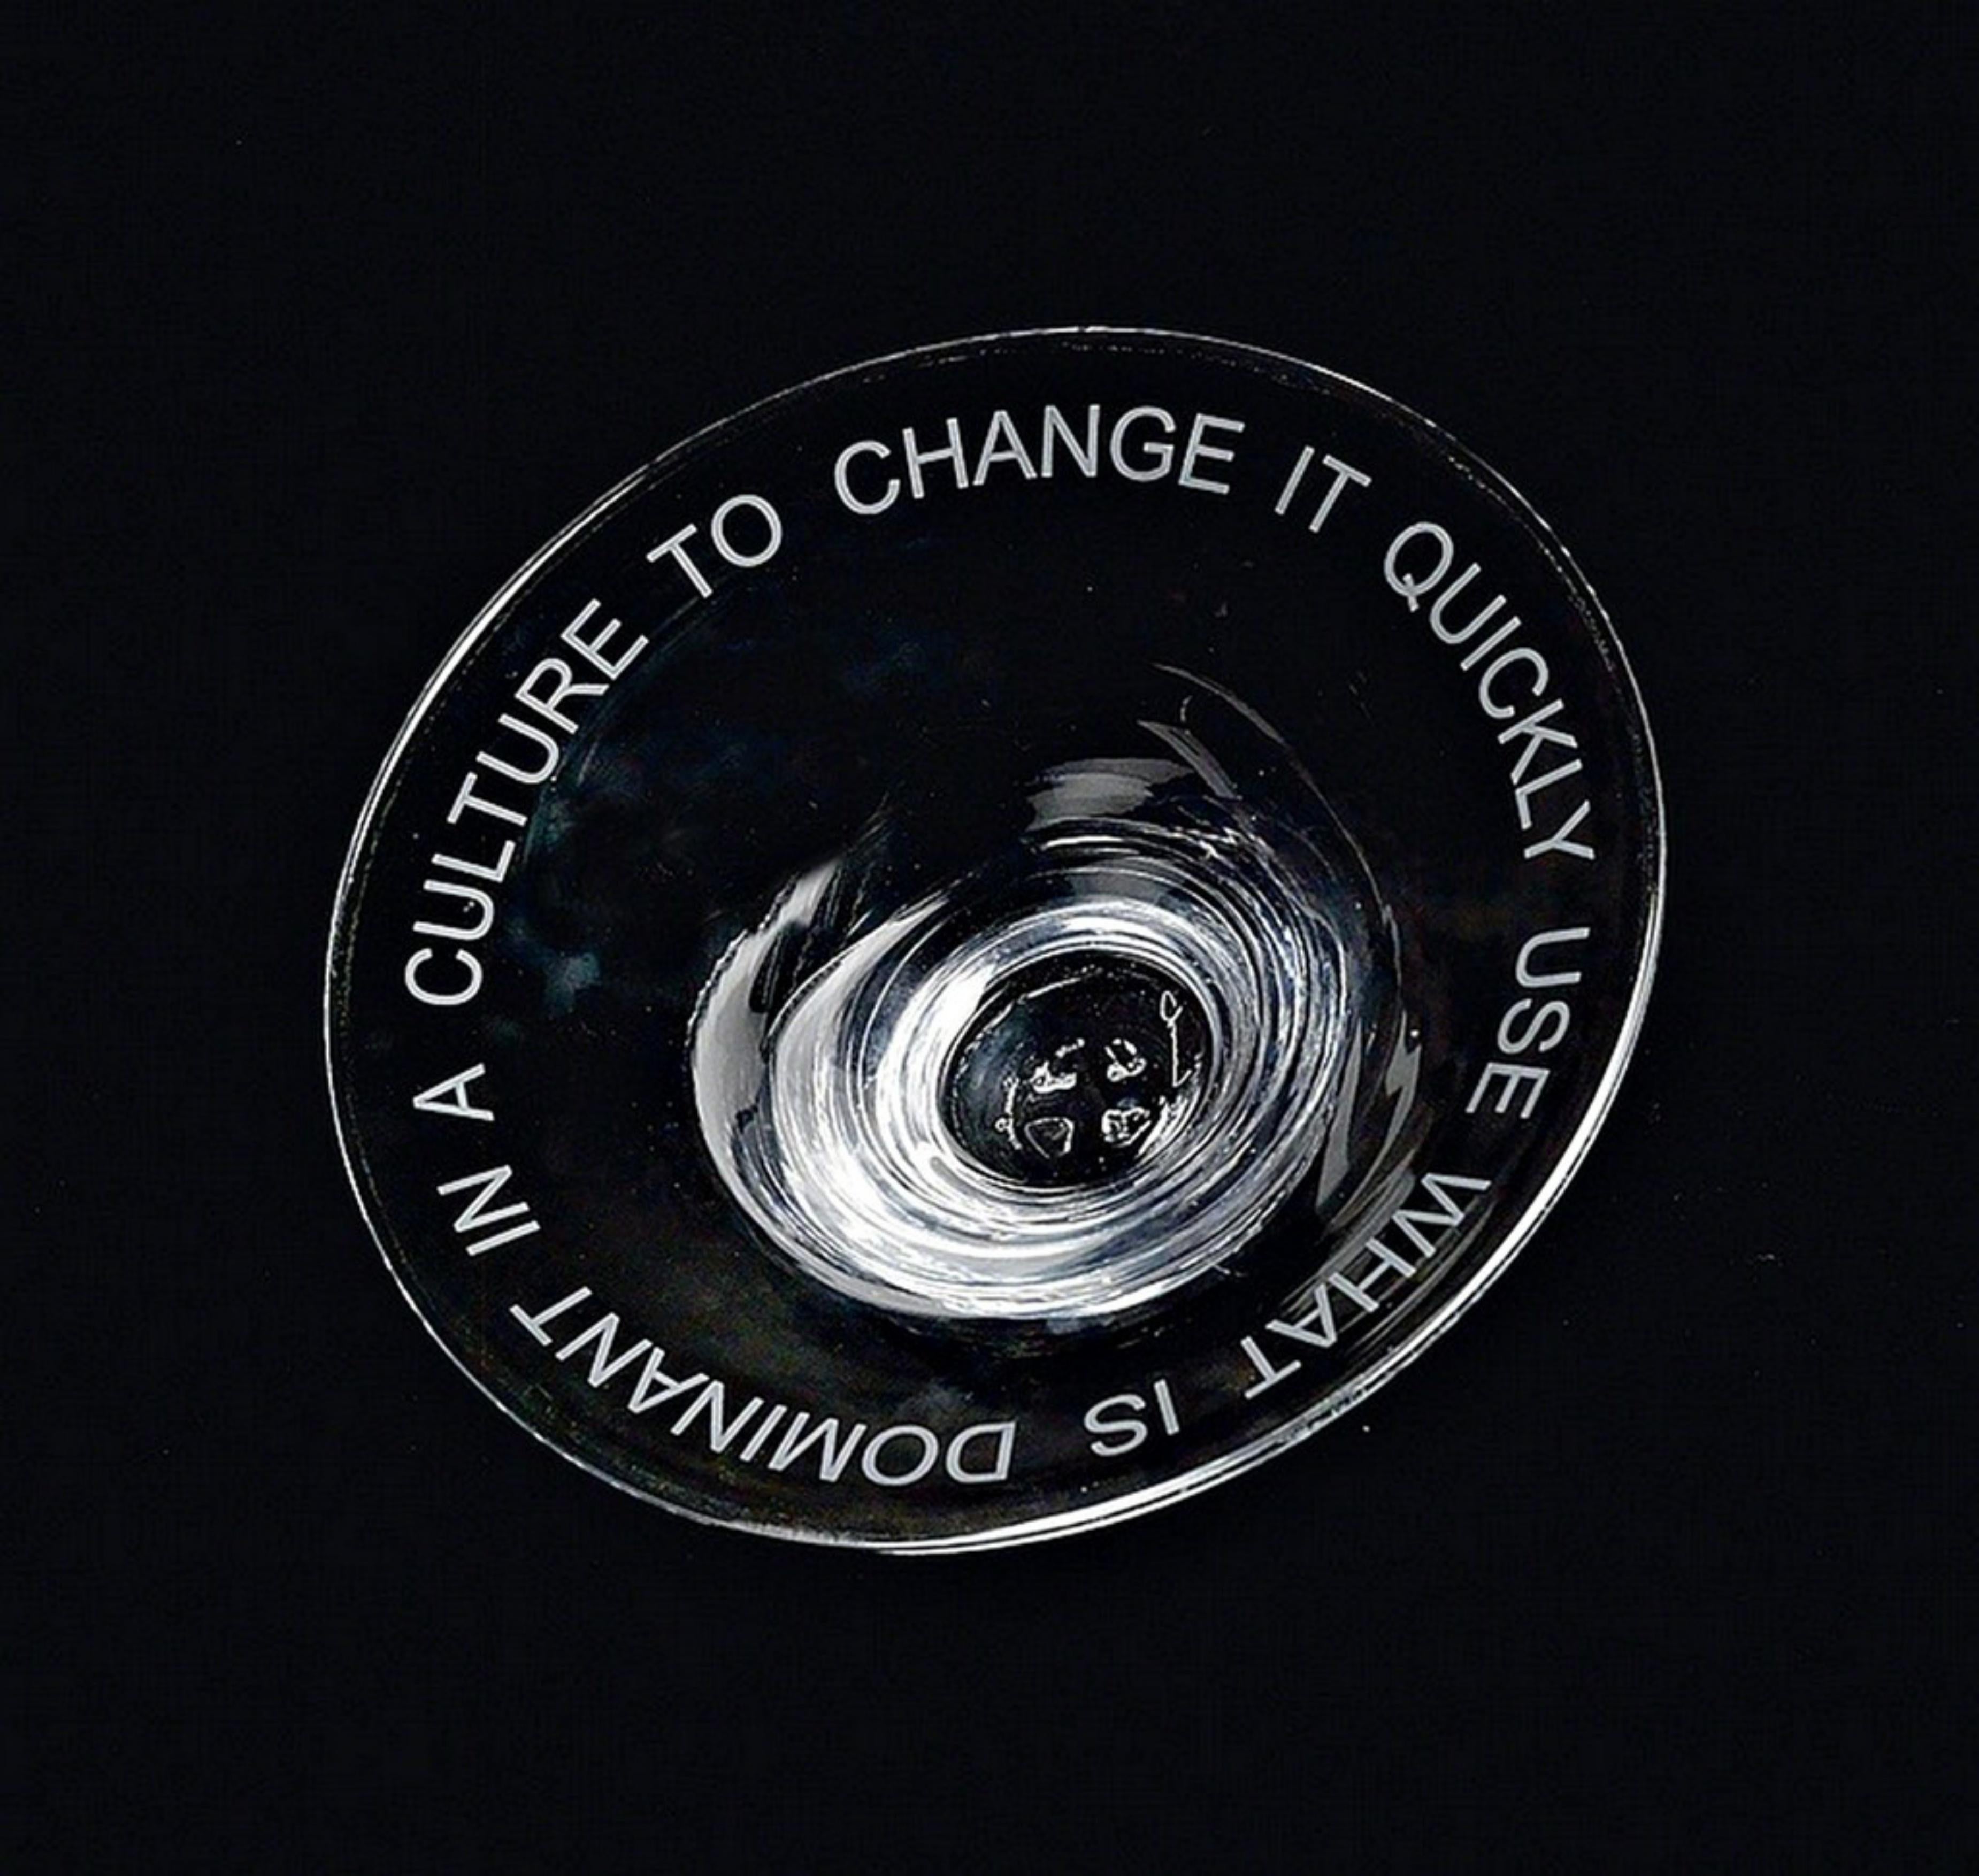 USE WHAT IS DOMINANT IN A CULTURE TO CHANGE IT: Signed glass bowl Whitney Museum - Contemporary Sculpture by Jenny Holzer